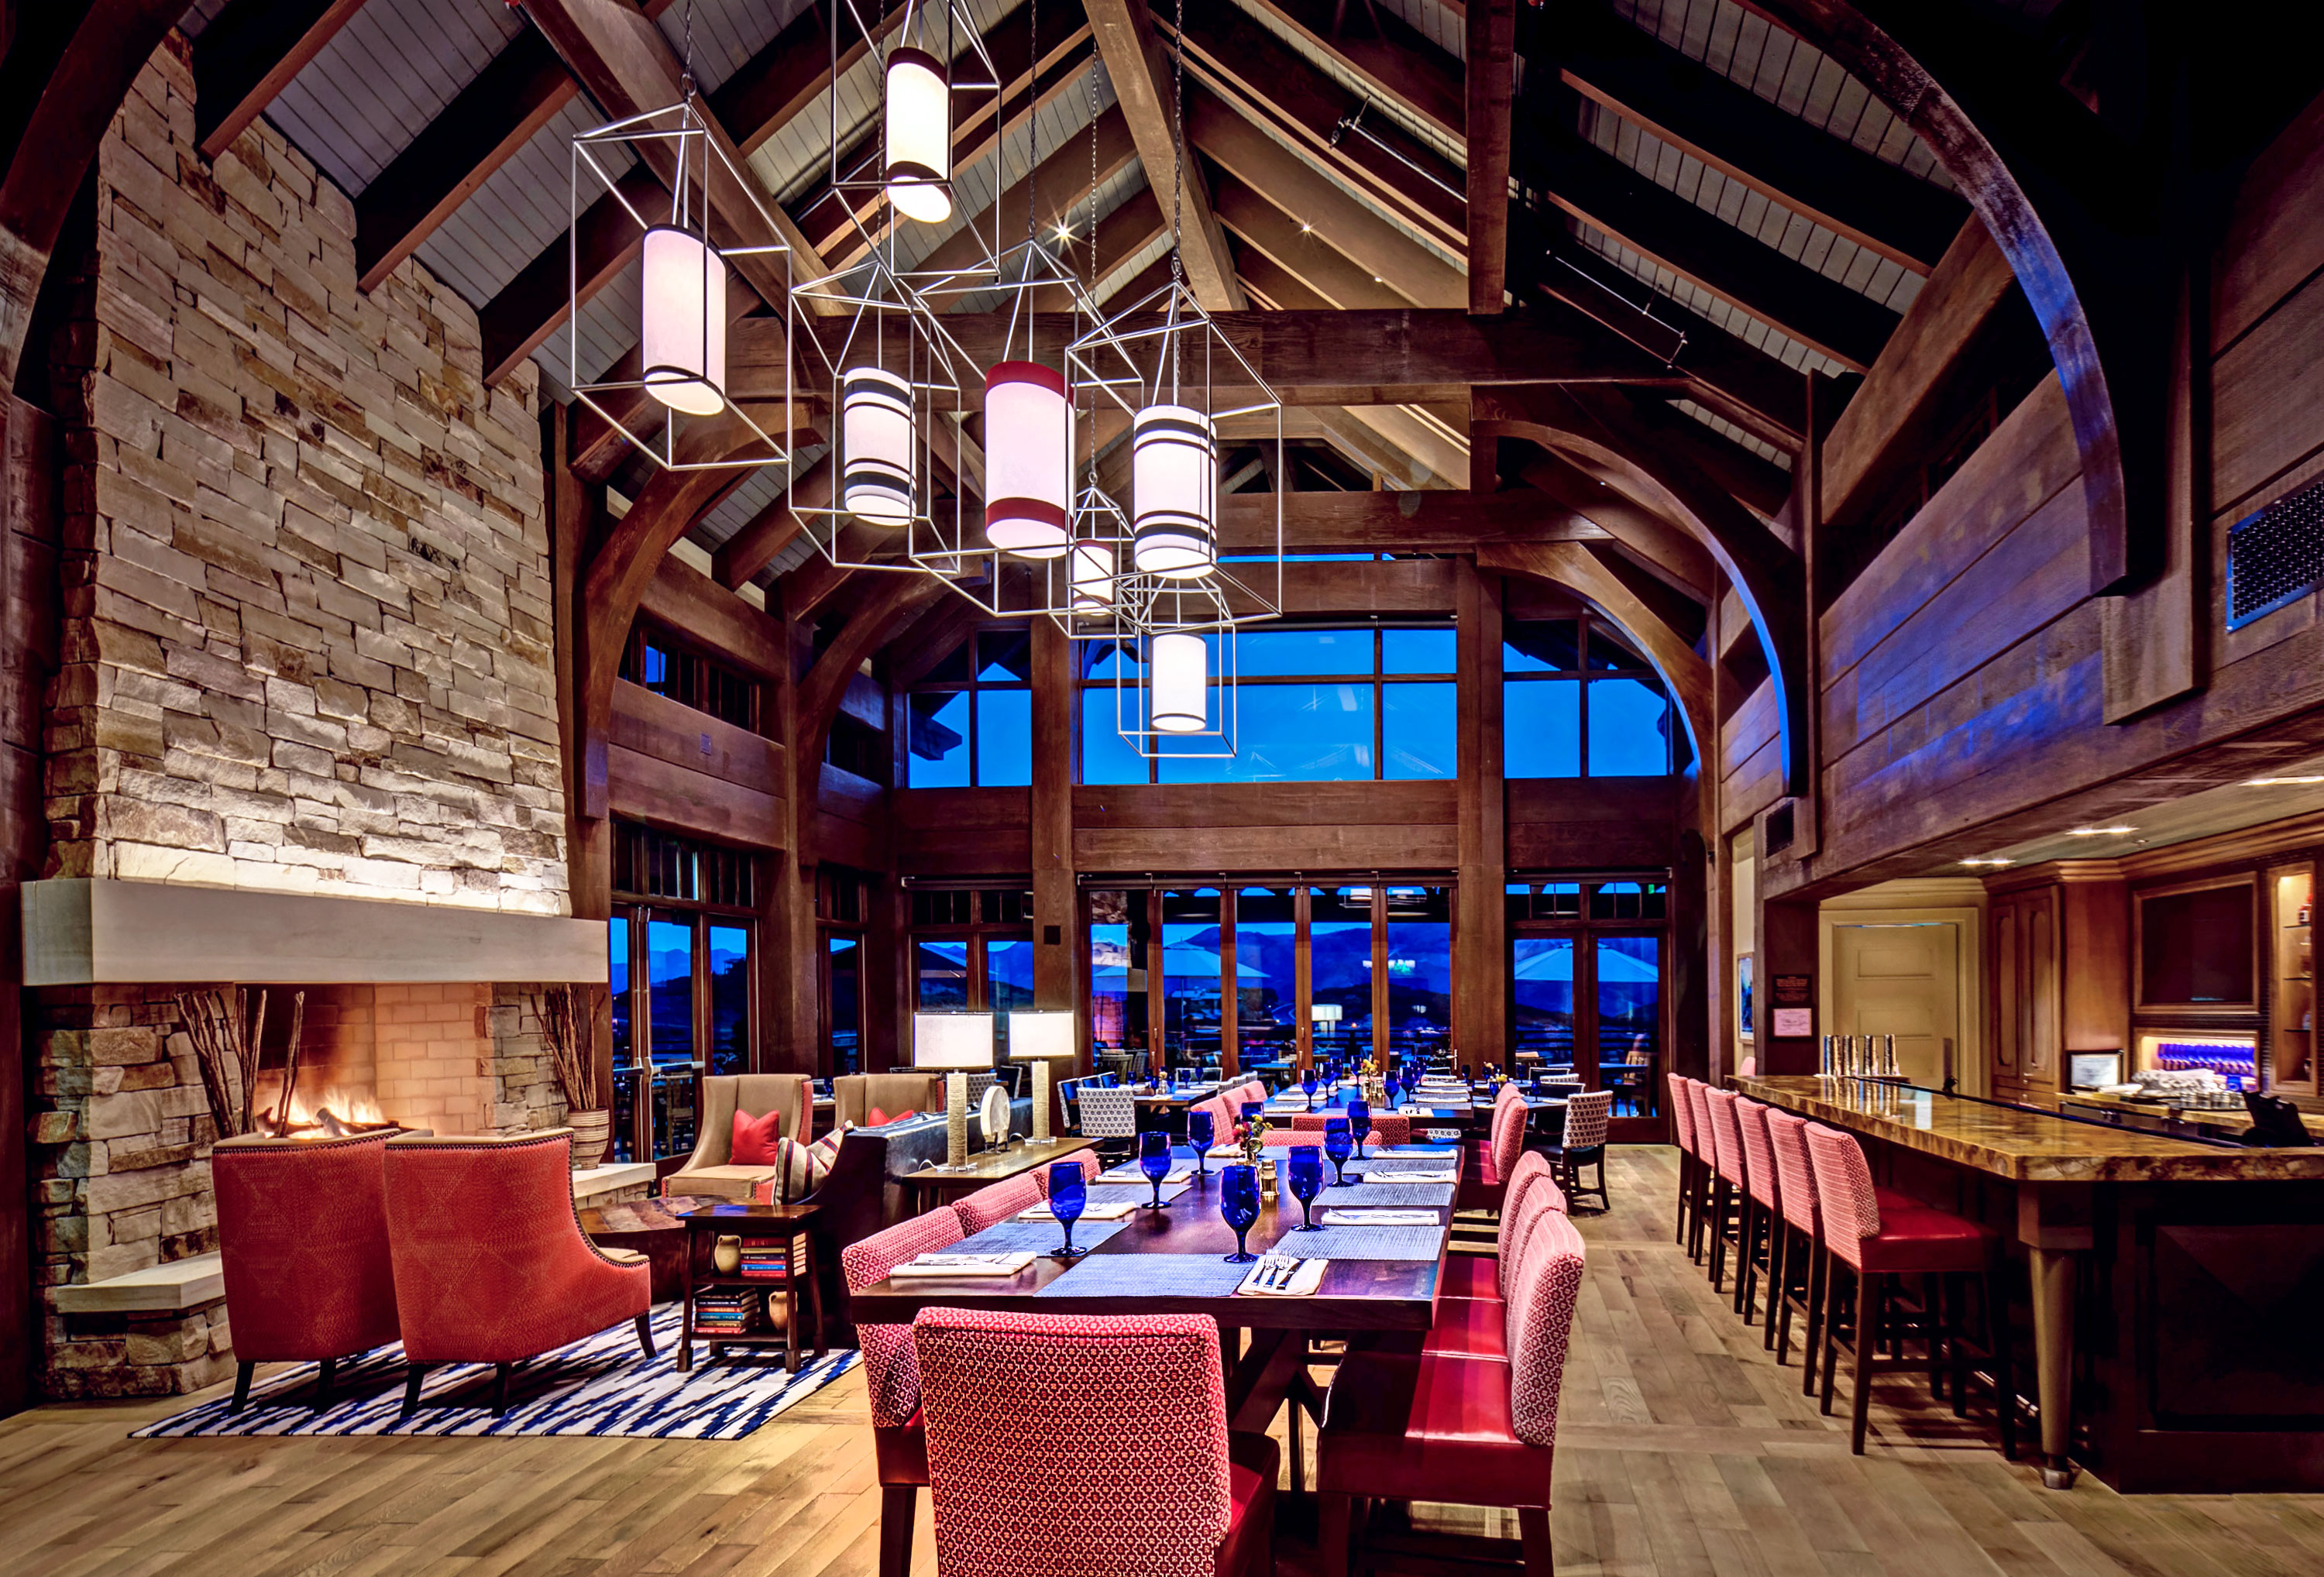 Tuhaye Lodge - Park City, Utah. Architecture Photography by Alan Blakely. 